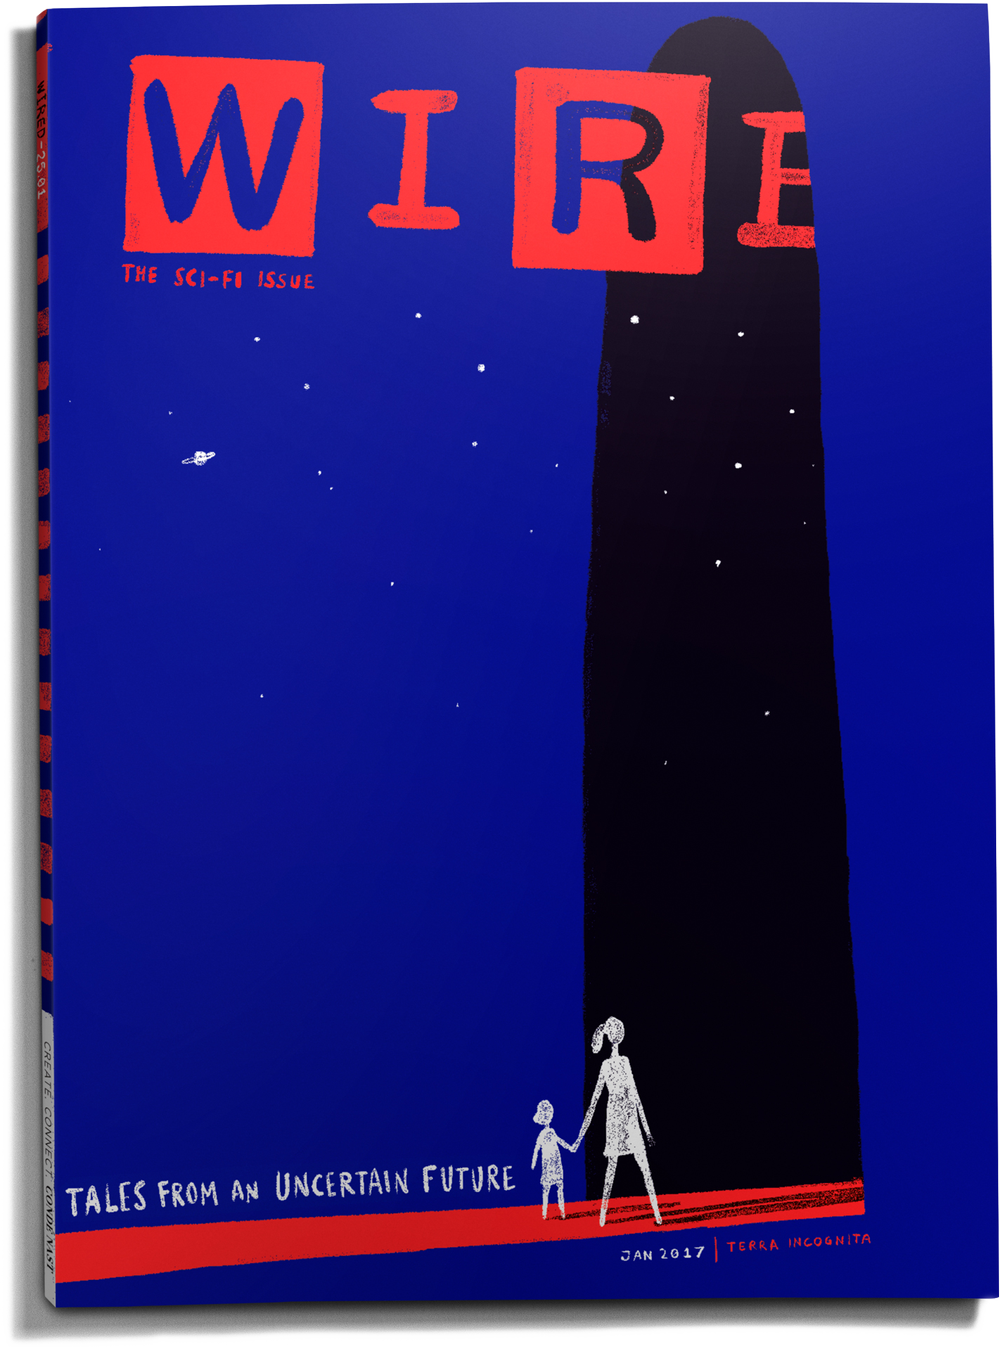 WIRED mag comps0168_2501CV_cover_LO.r2(Shadow_Fix_10.30).png